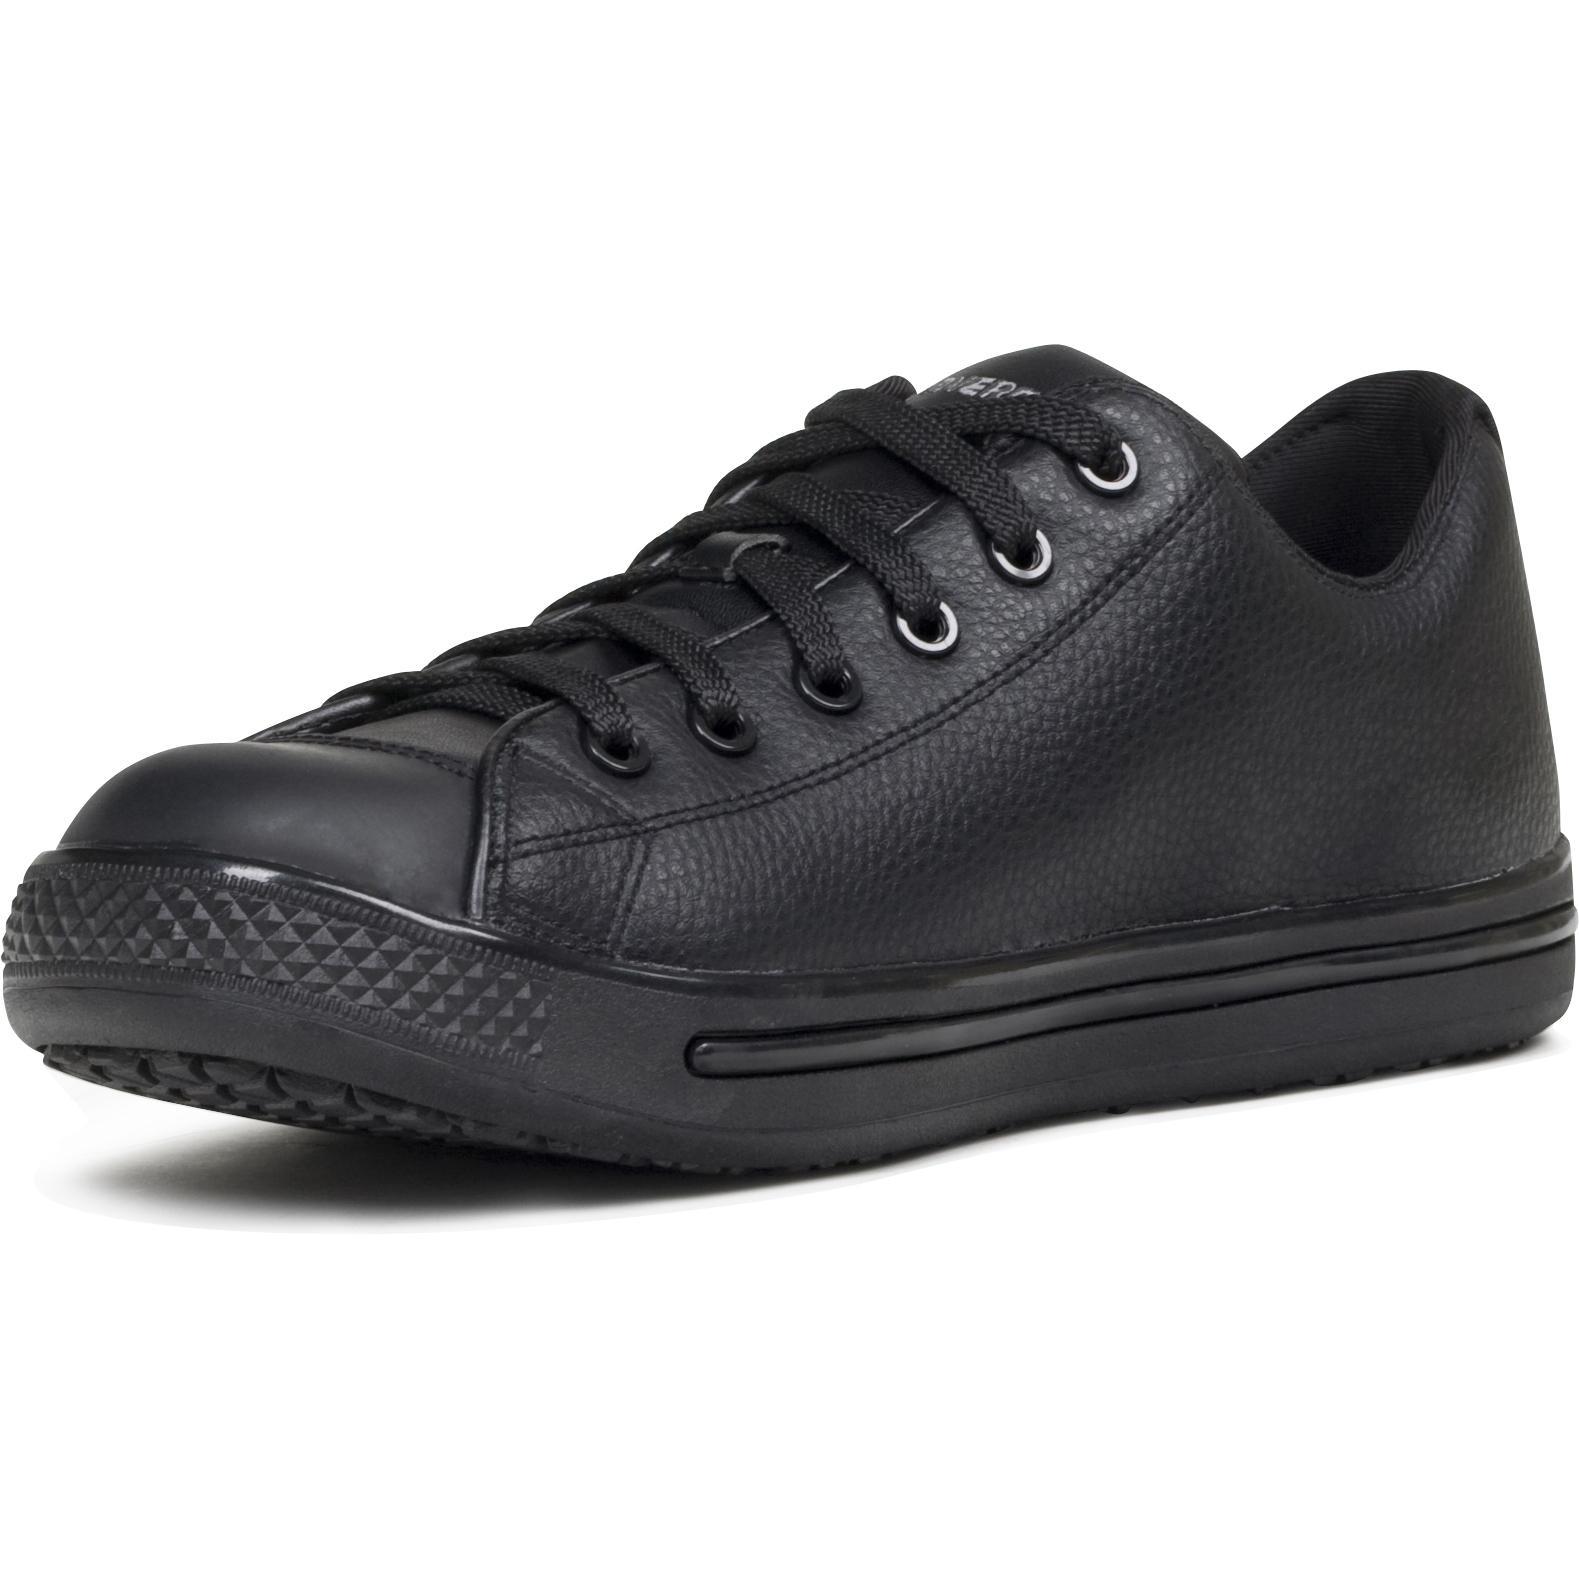 Resistant Lehigh Shoes safety  Safety shoes Slip   converse Converse Oxford